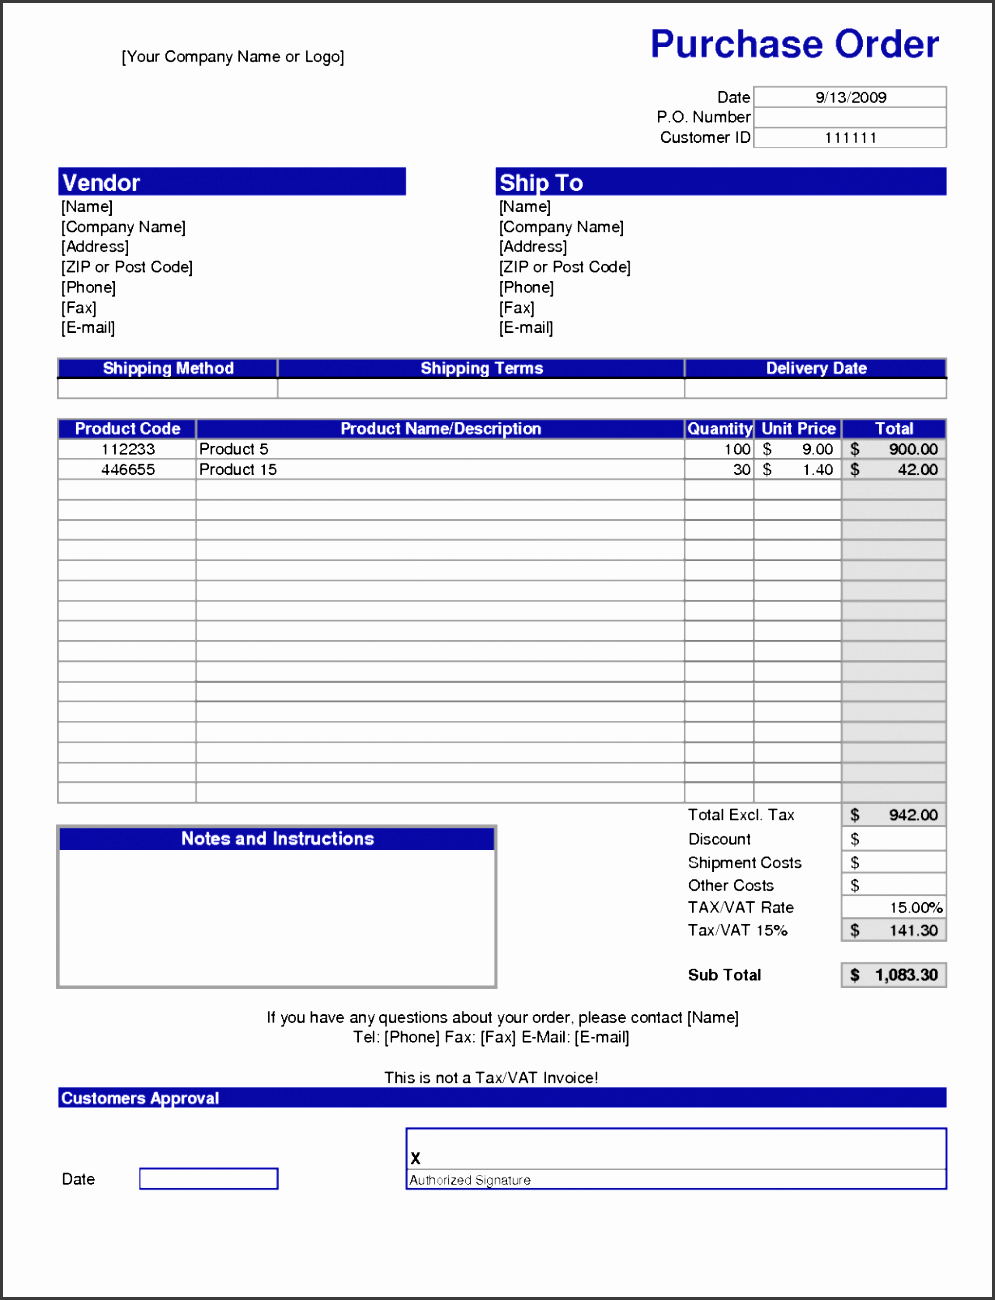 free printable purchase order form shop forms 10 purchase order template bud letter forms pdf 113 staples in word quickbooks excel kerala free with